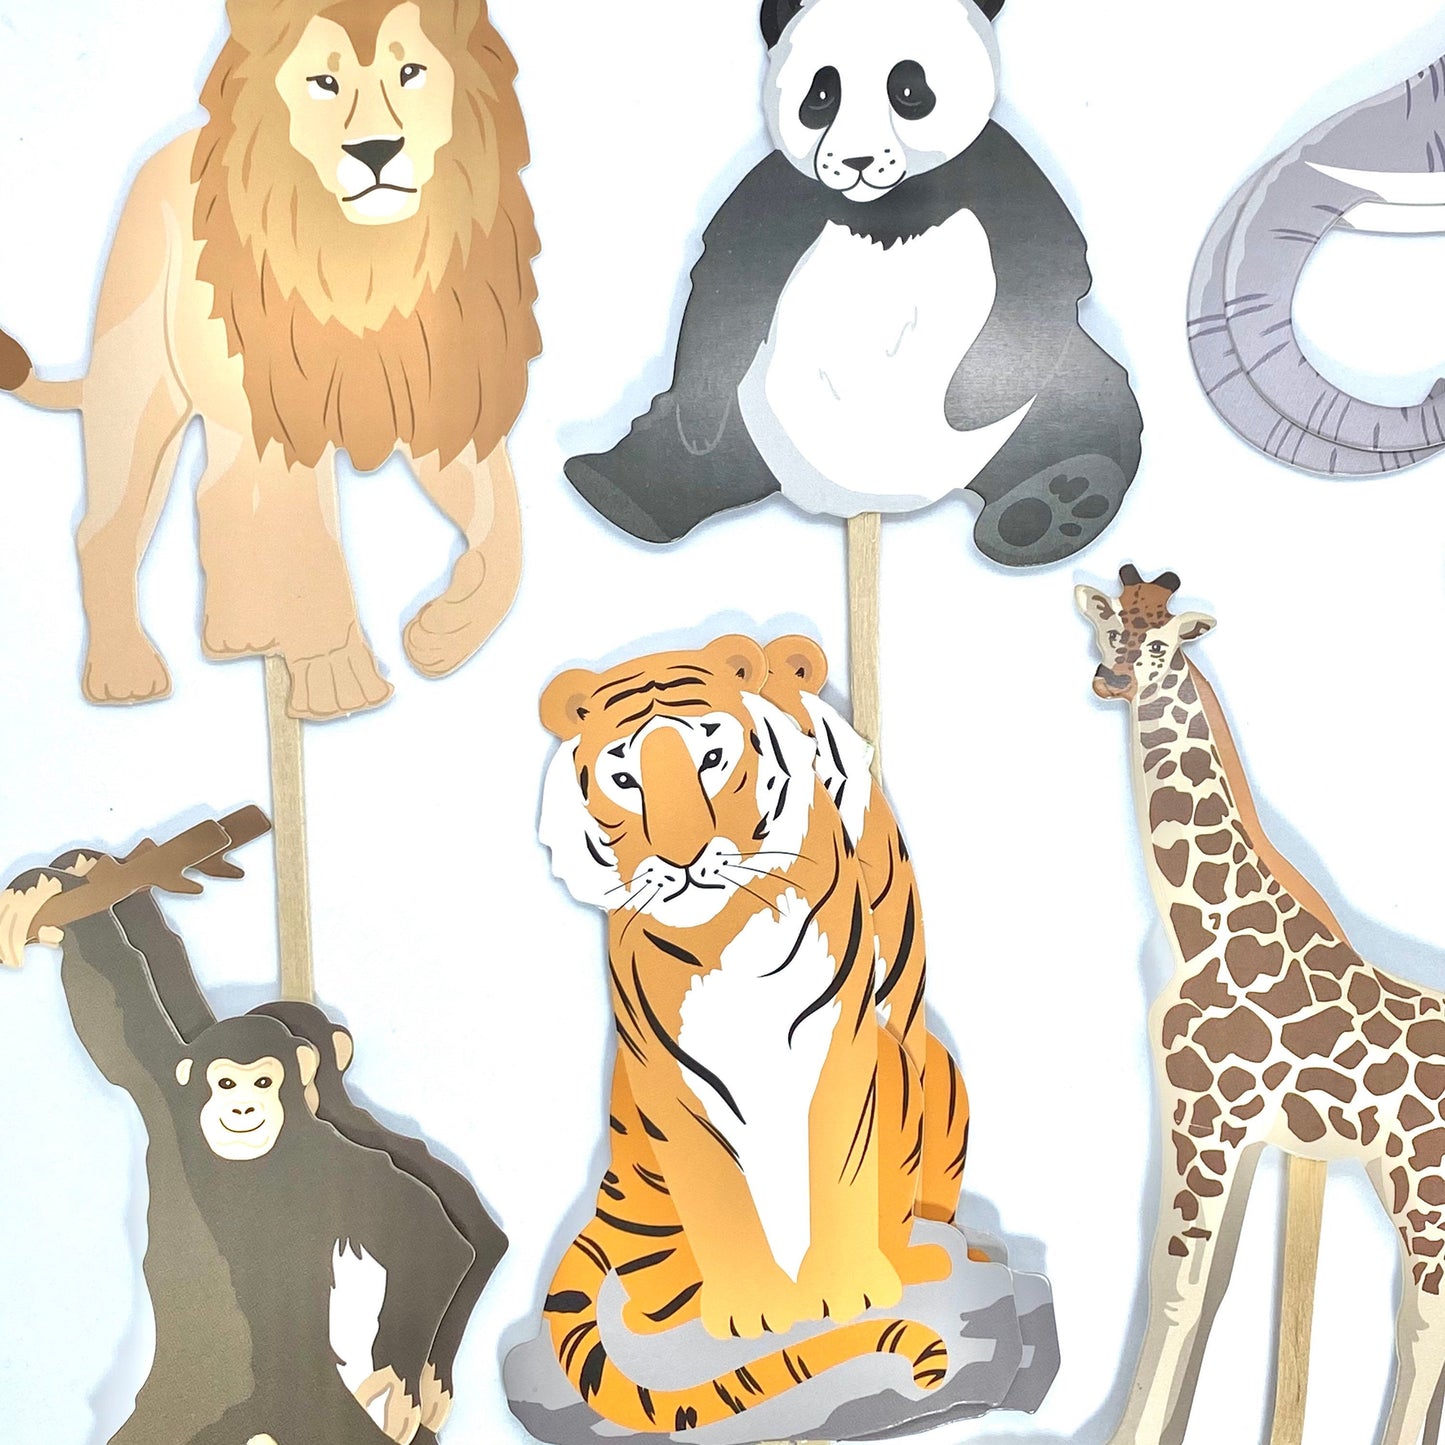 Zoo Animal Cupcake Toppers